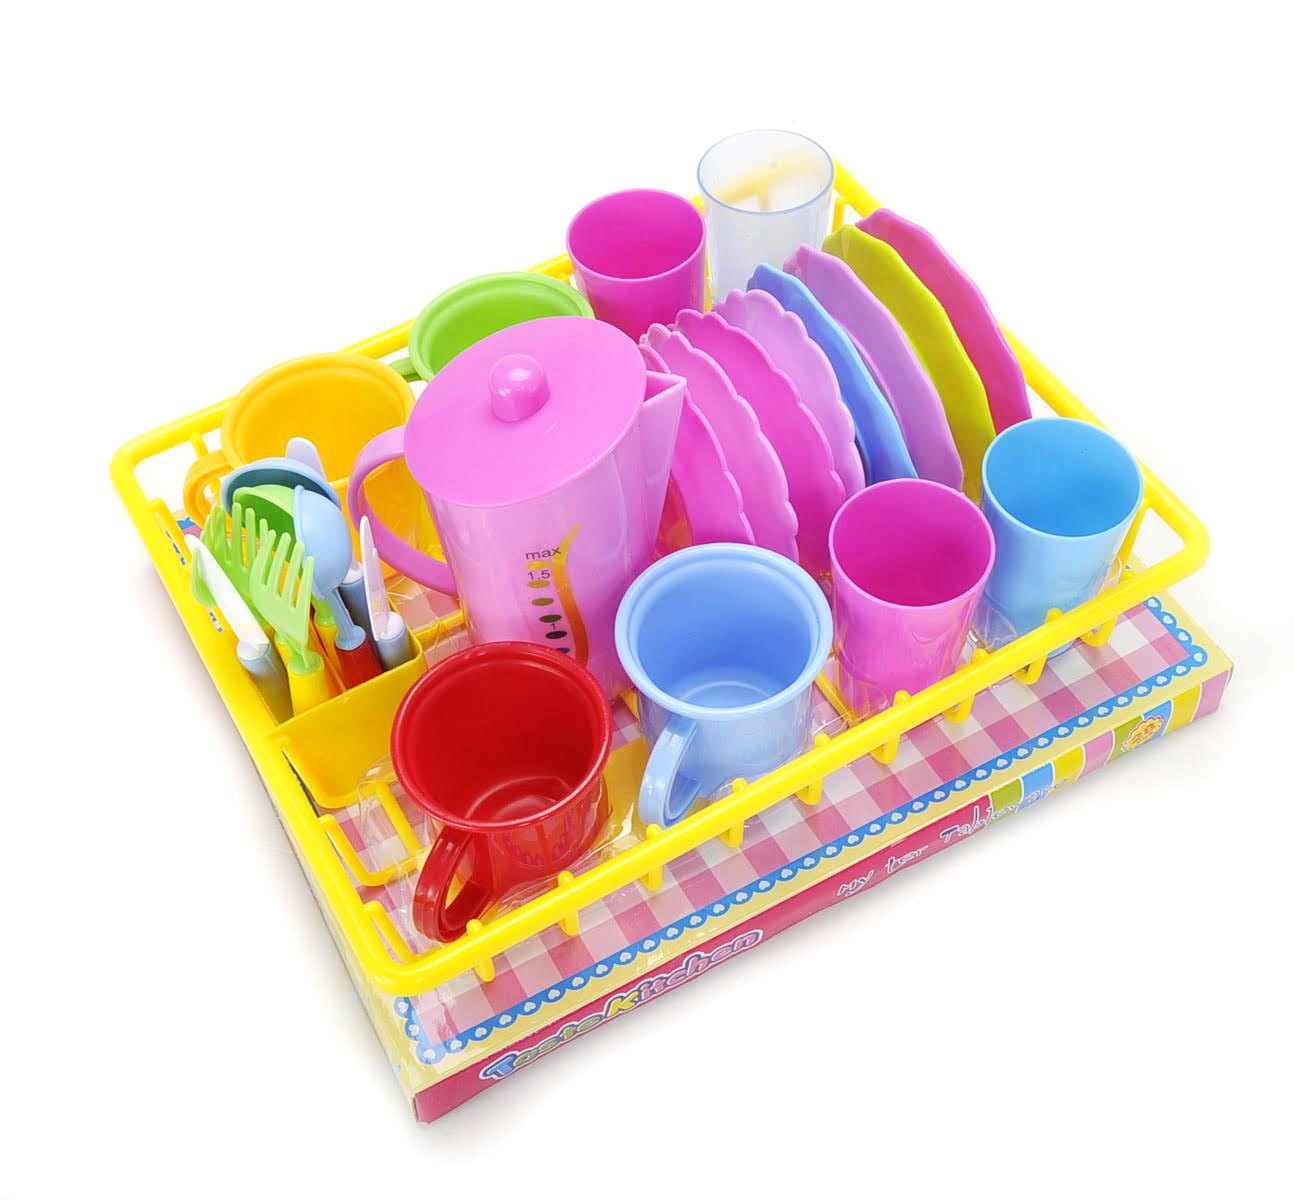 25 pcs with Drainer JOYIN Kids Kitchen Pretend Play Dish Wash and Dry Childrens Play Dishes Pans and Pots Playset 